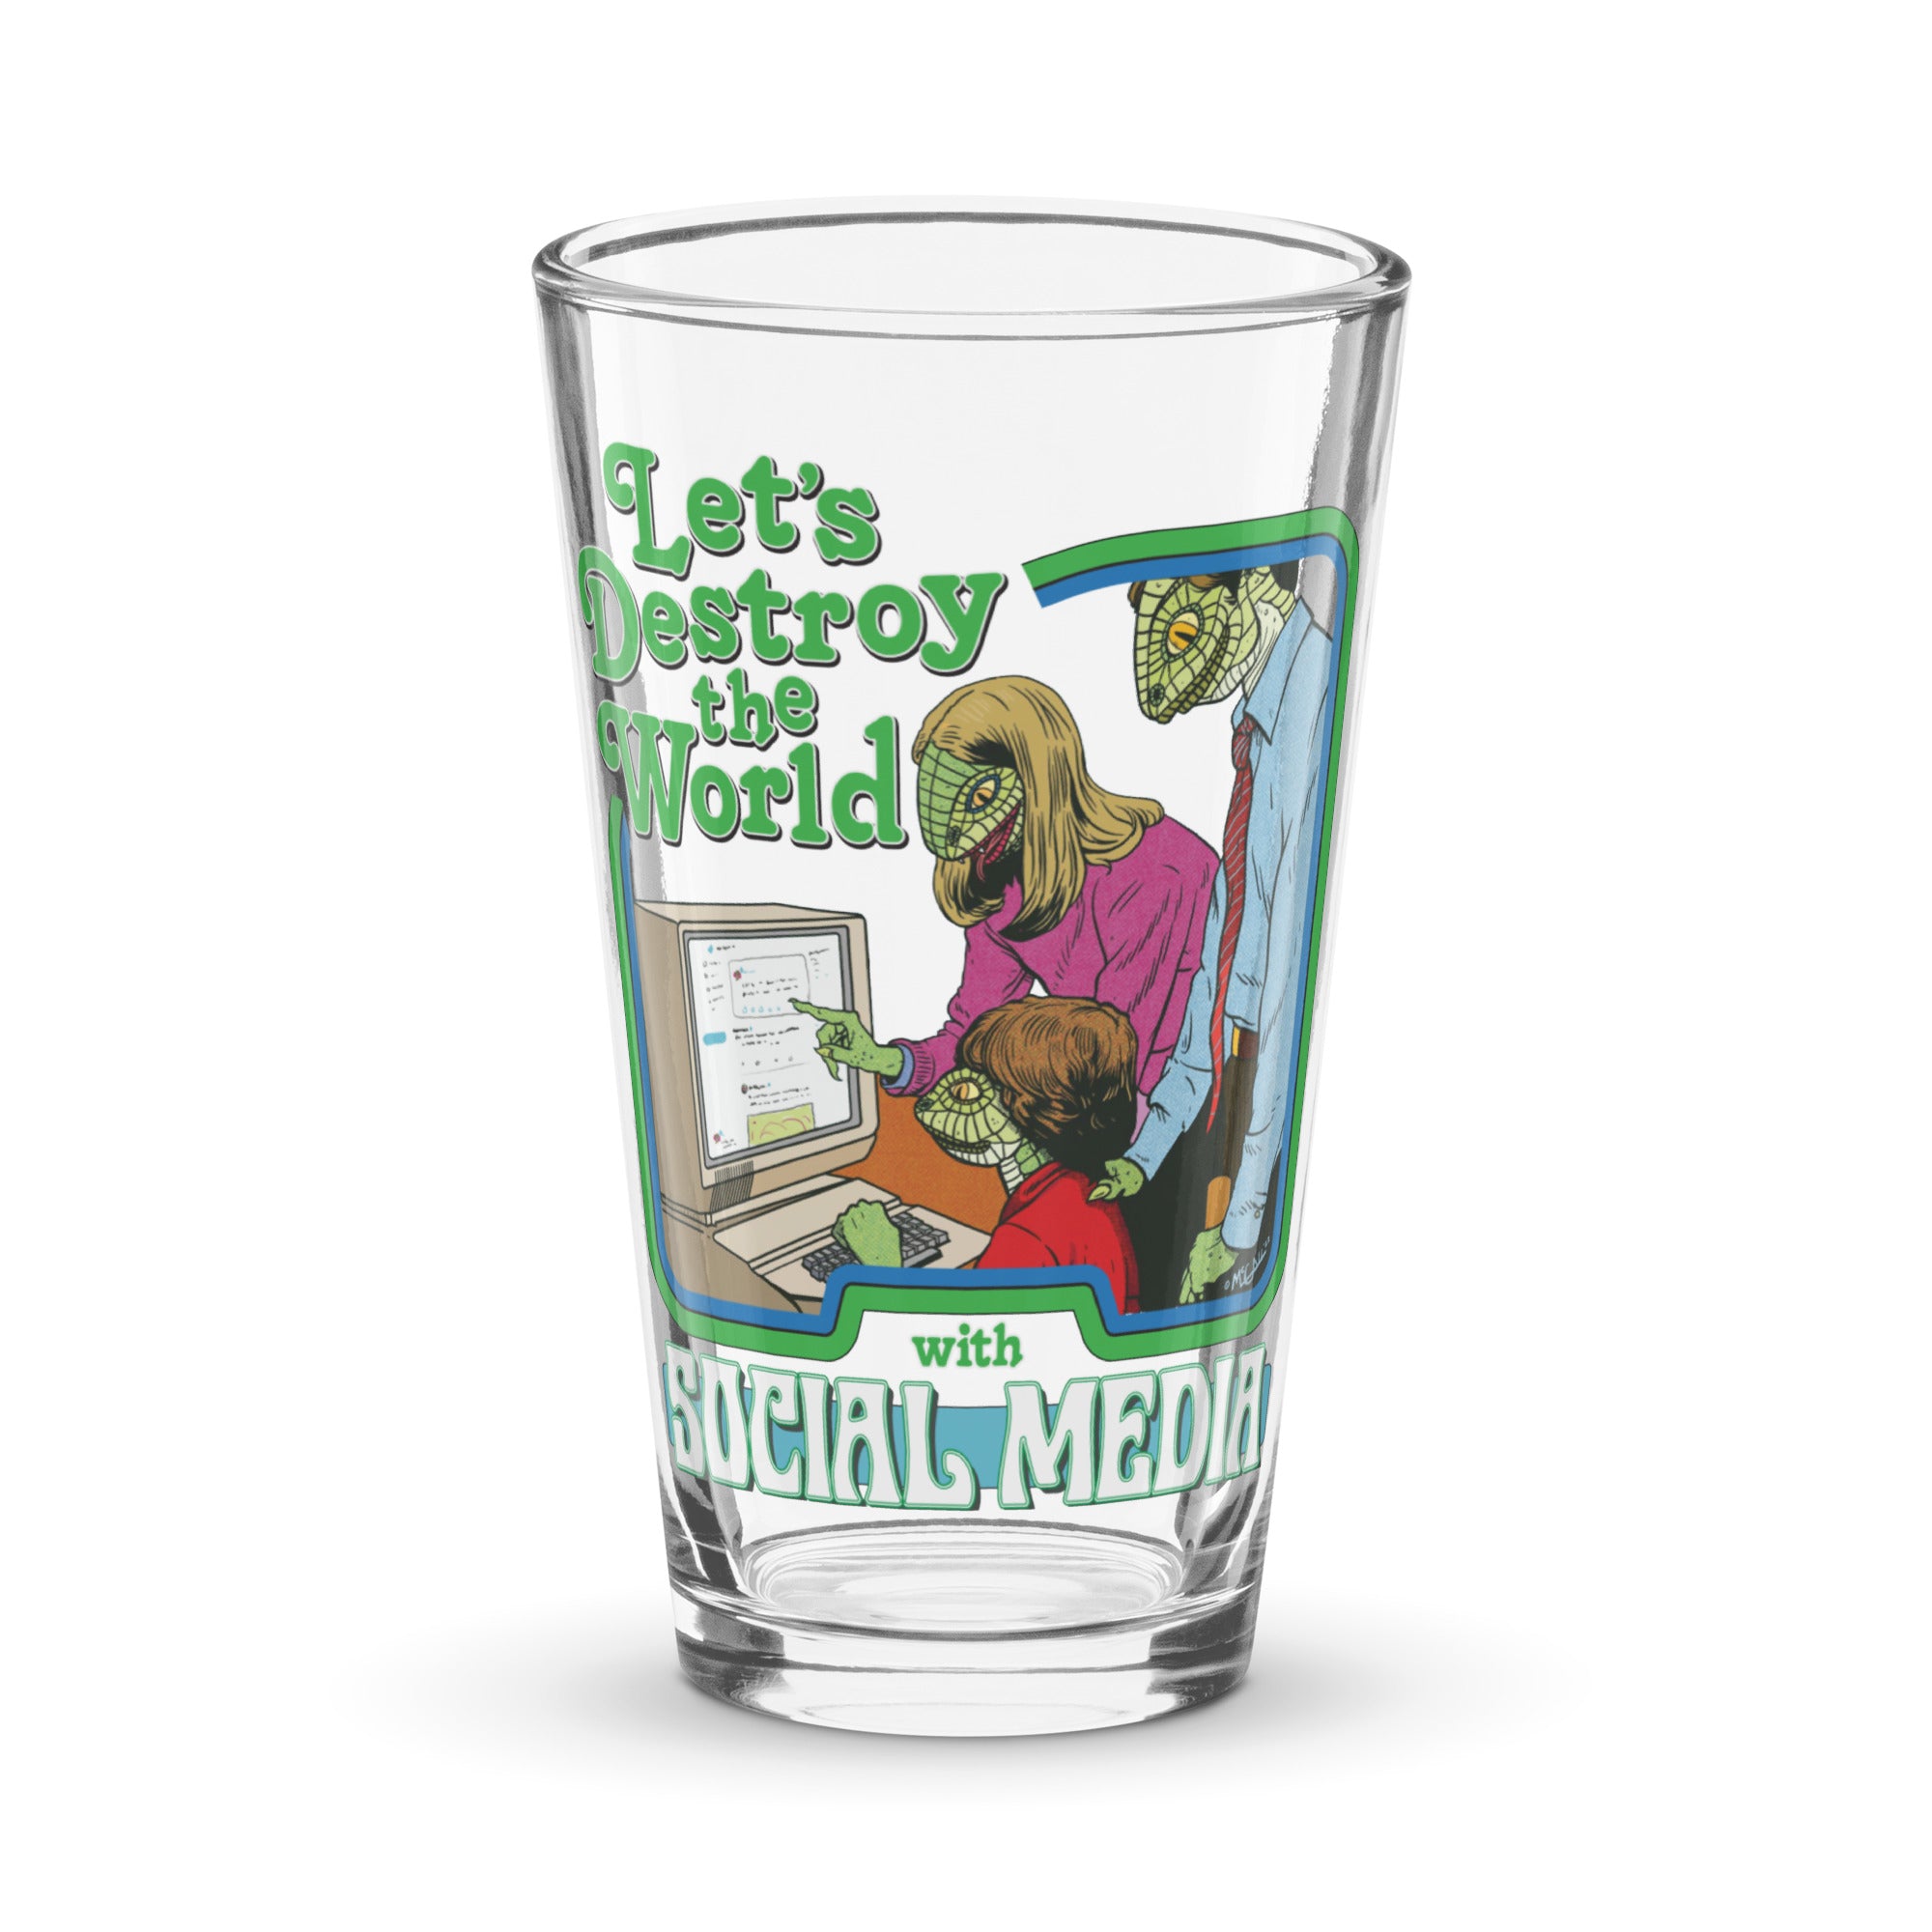 Let's Destroy the World with Social Media Pint Glass